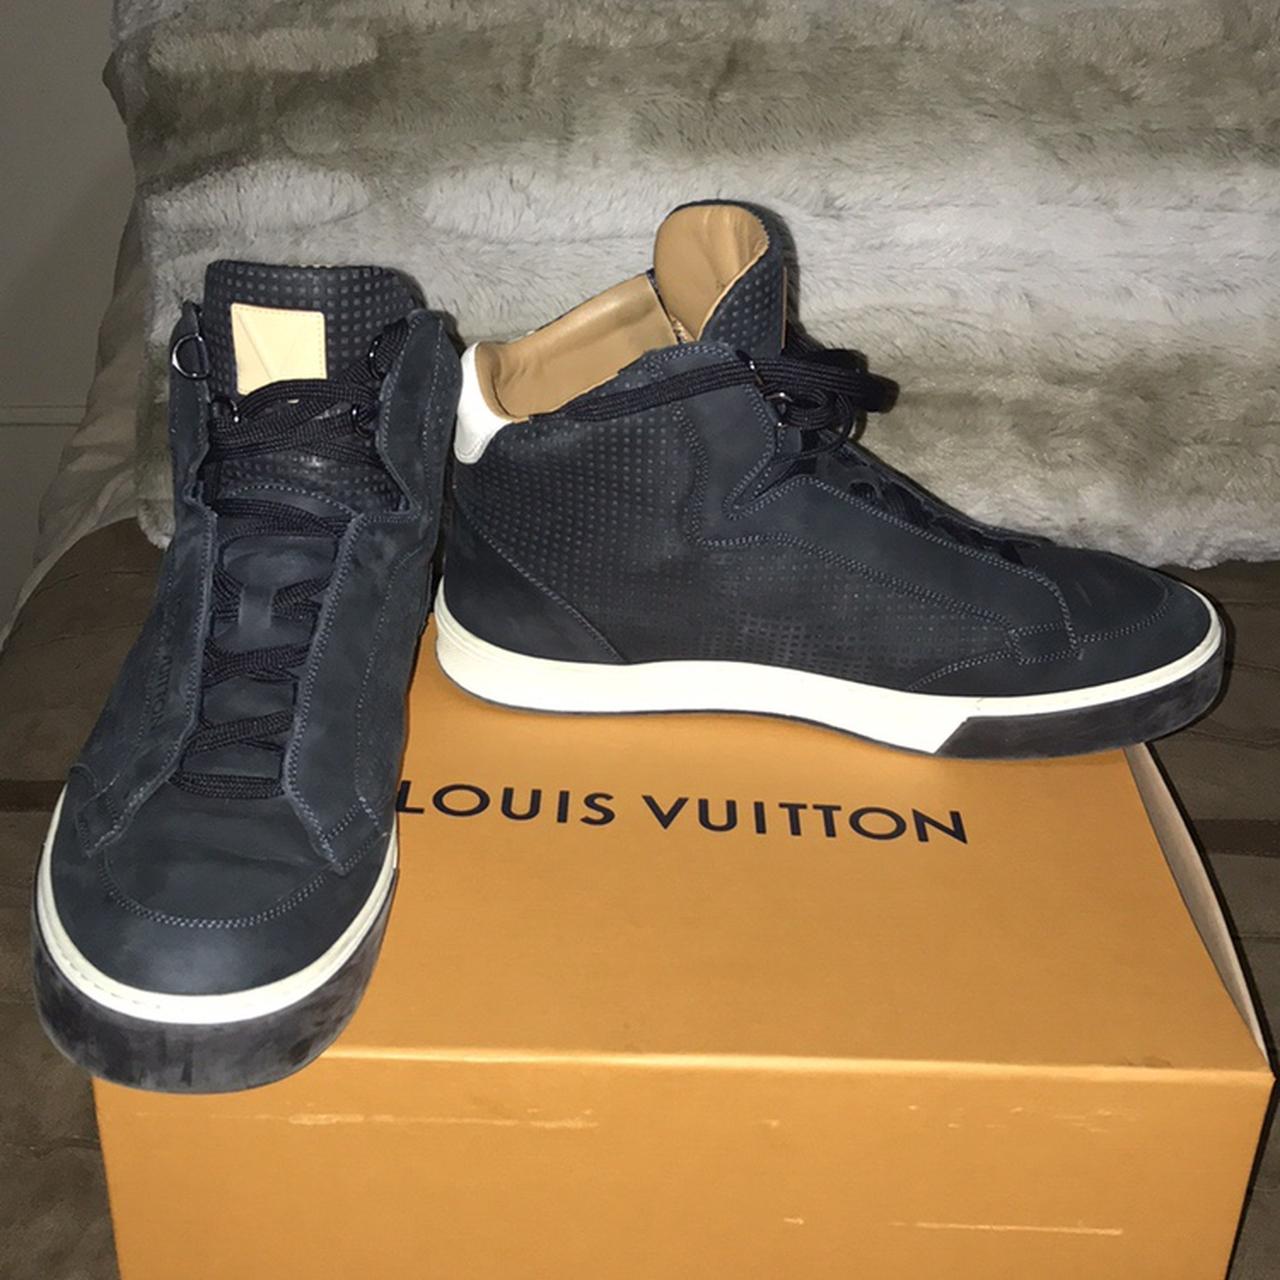 Authentic Louis Vuitton Mens High Top Sneakers Size 8.5 for Sale